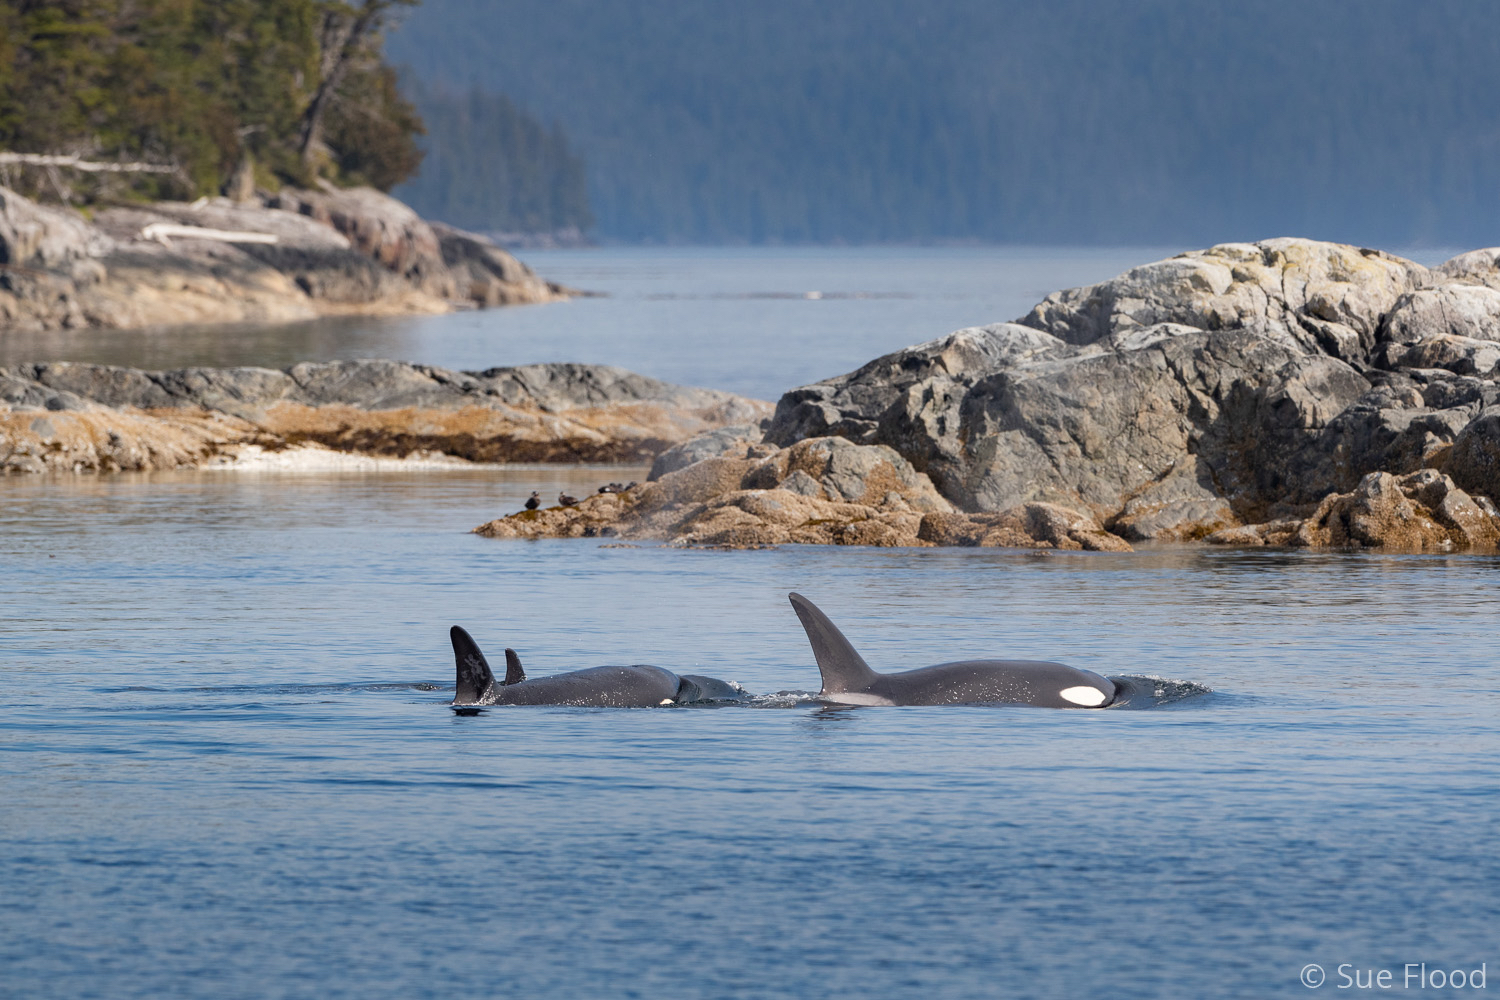 Pod of orca or killer whales, British Columbia, Canada.